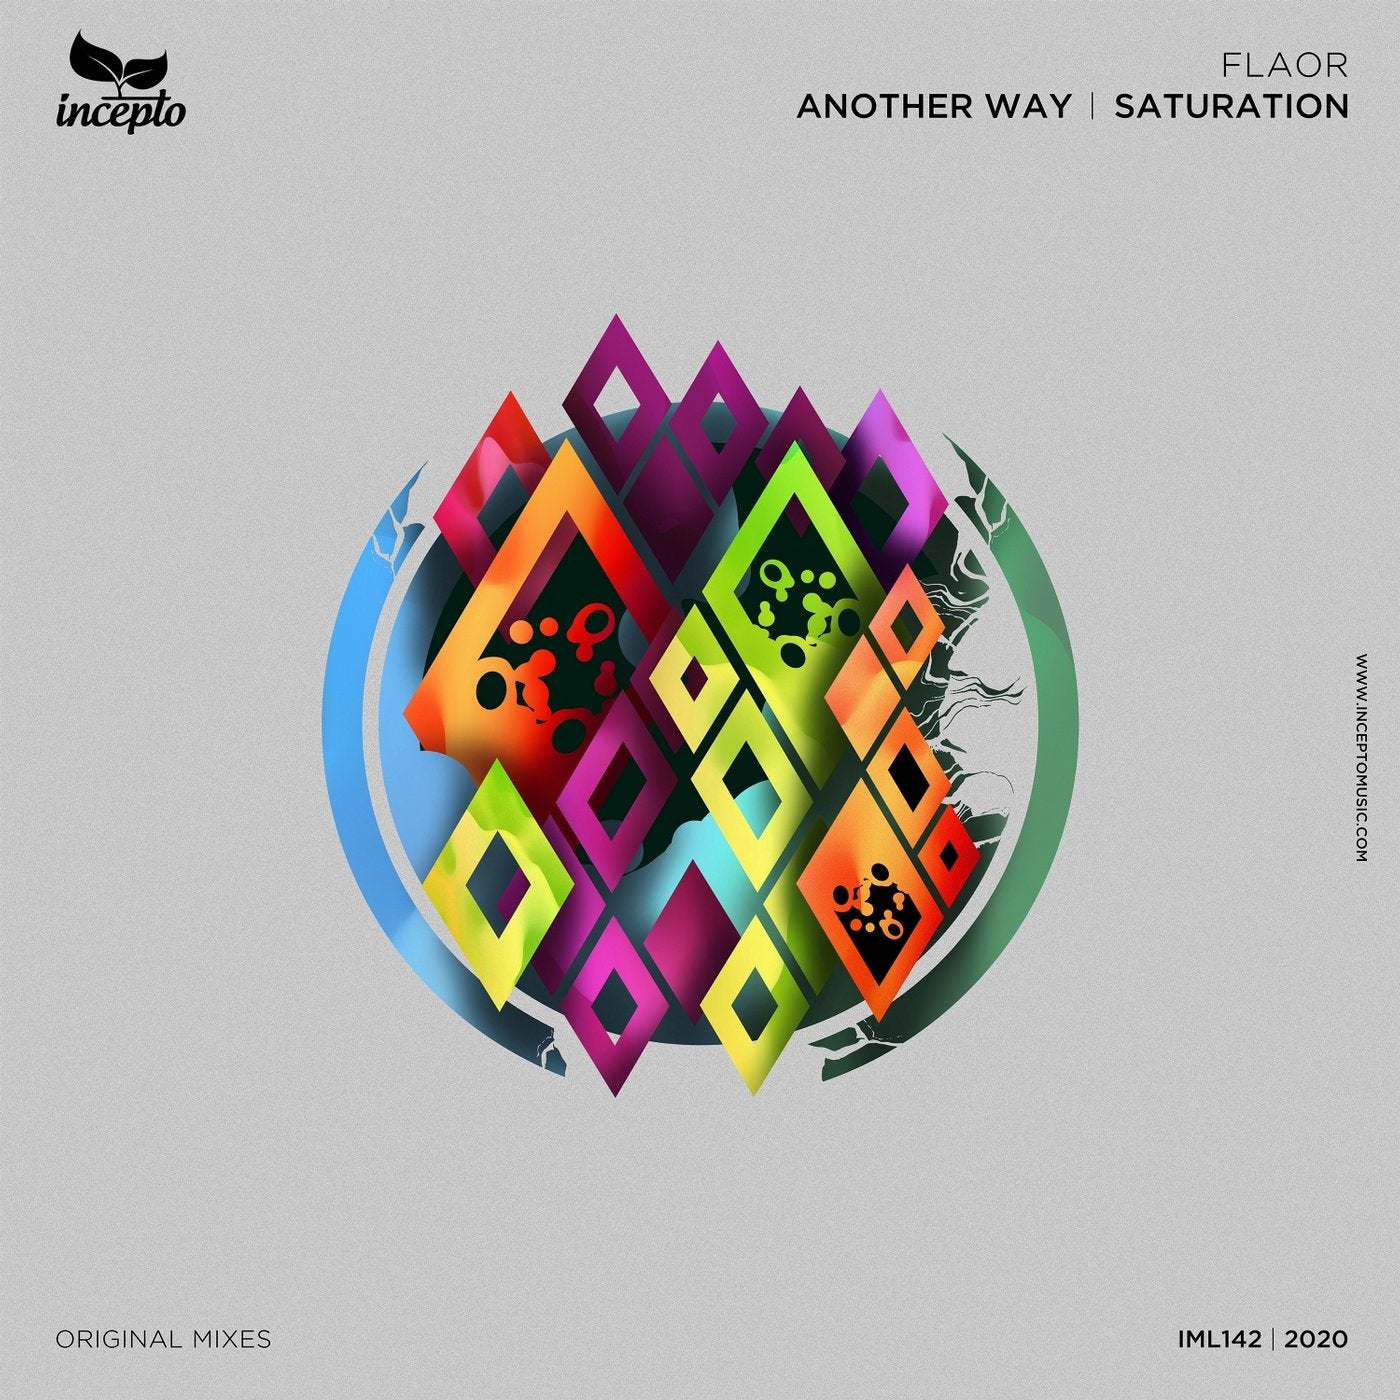 Another Way / Saturation